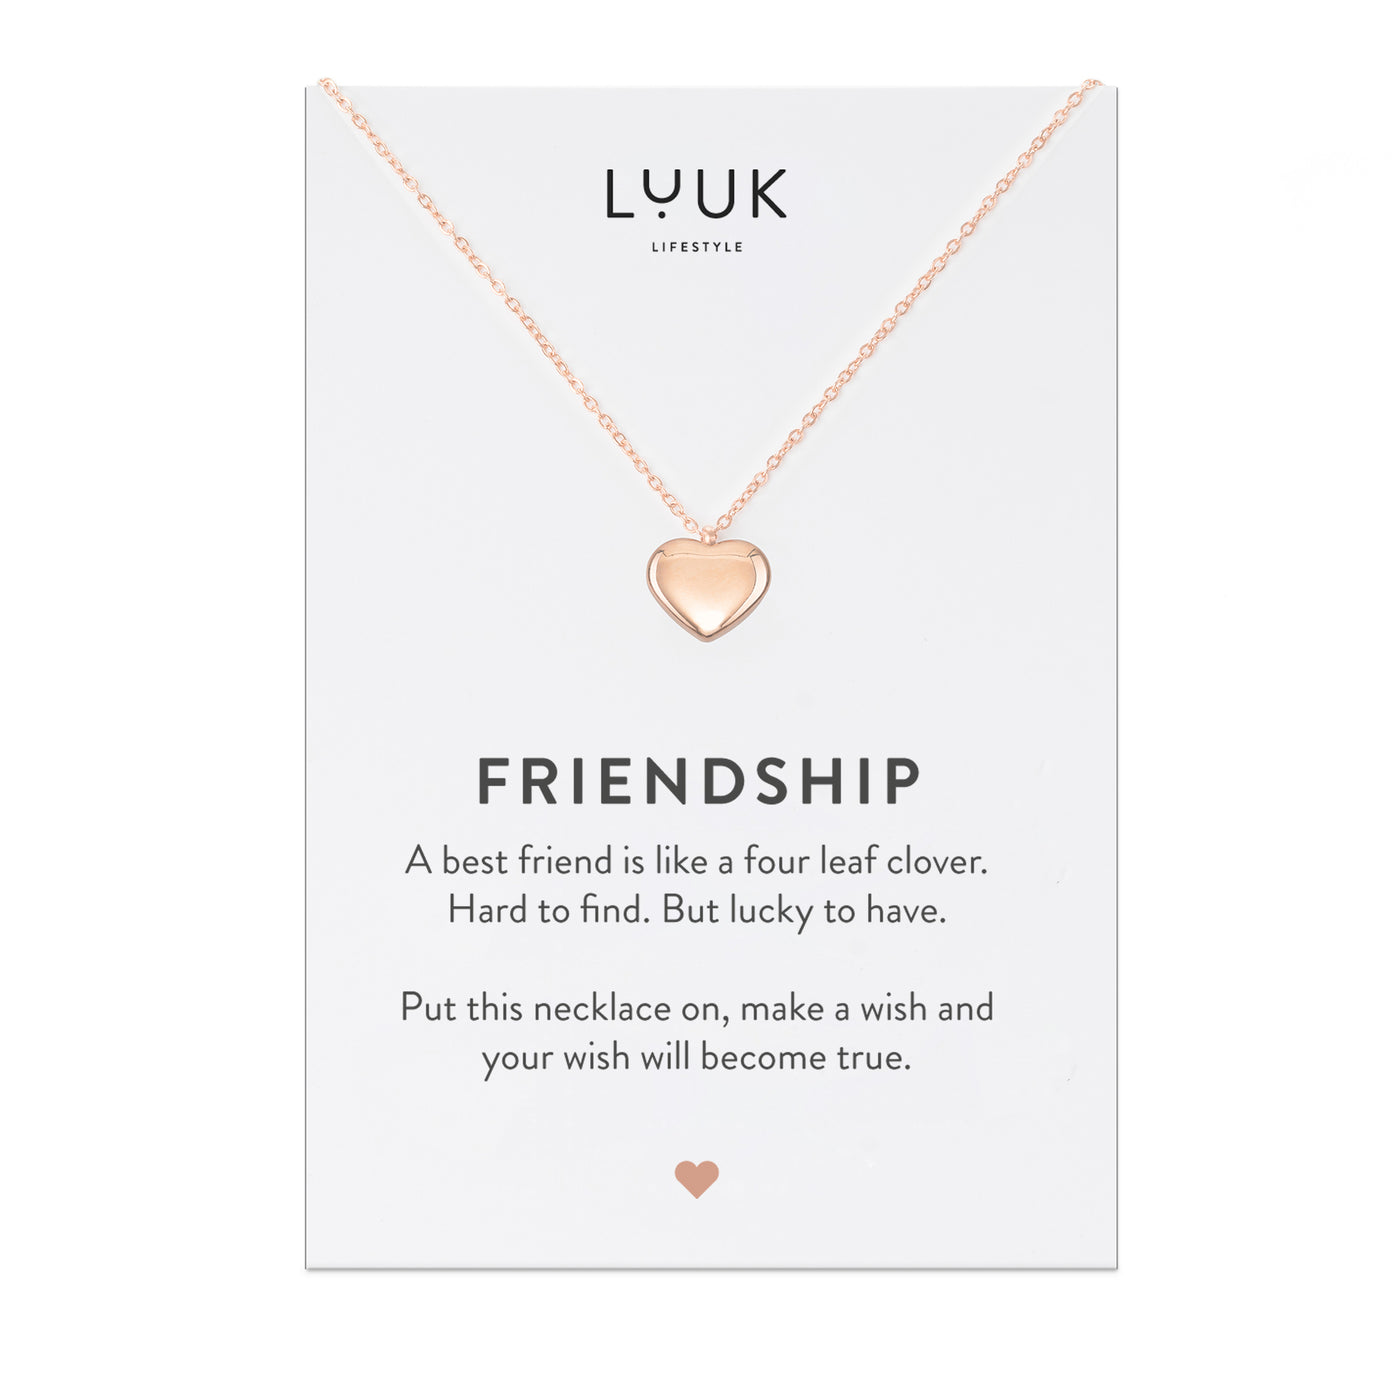 Necklace with heart pendant and Friendship greeting card